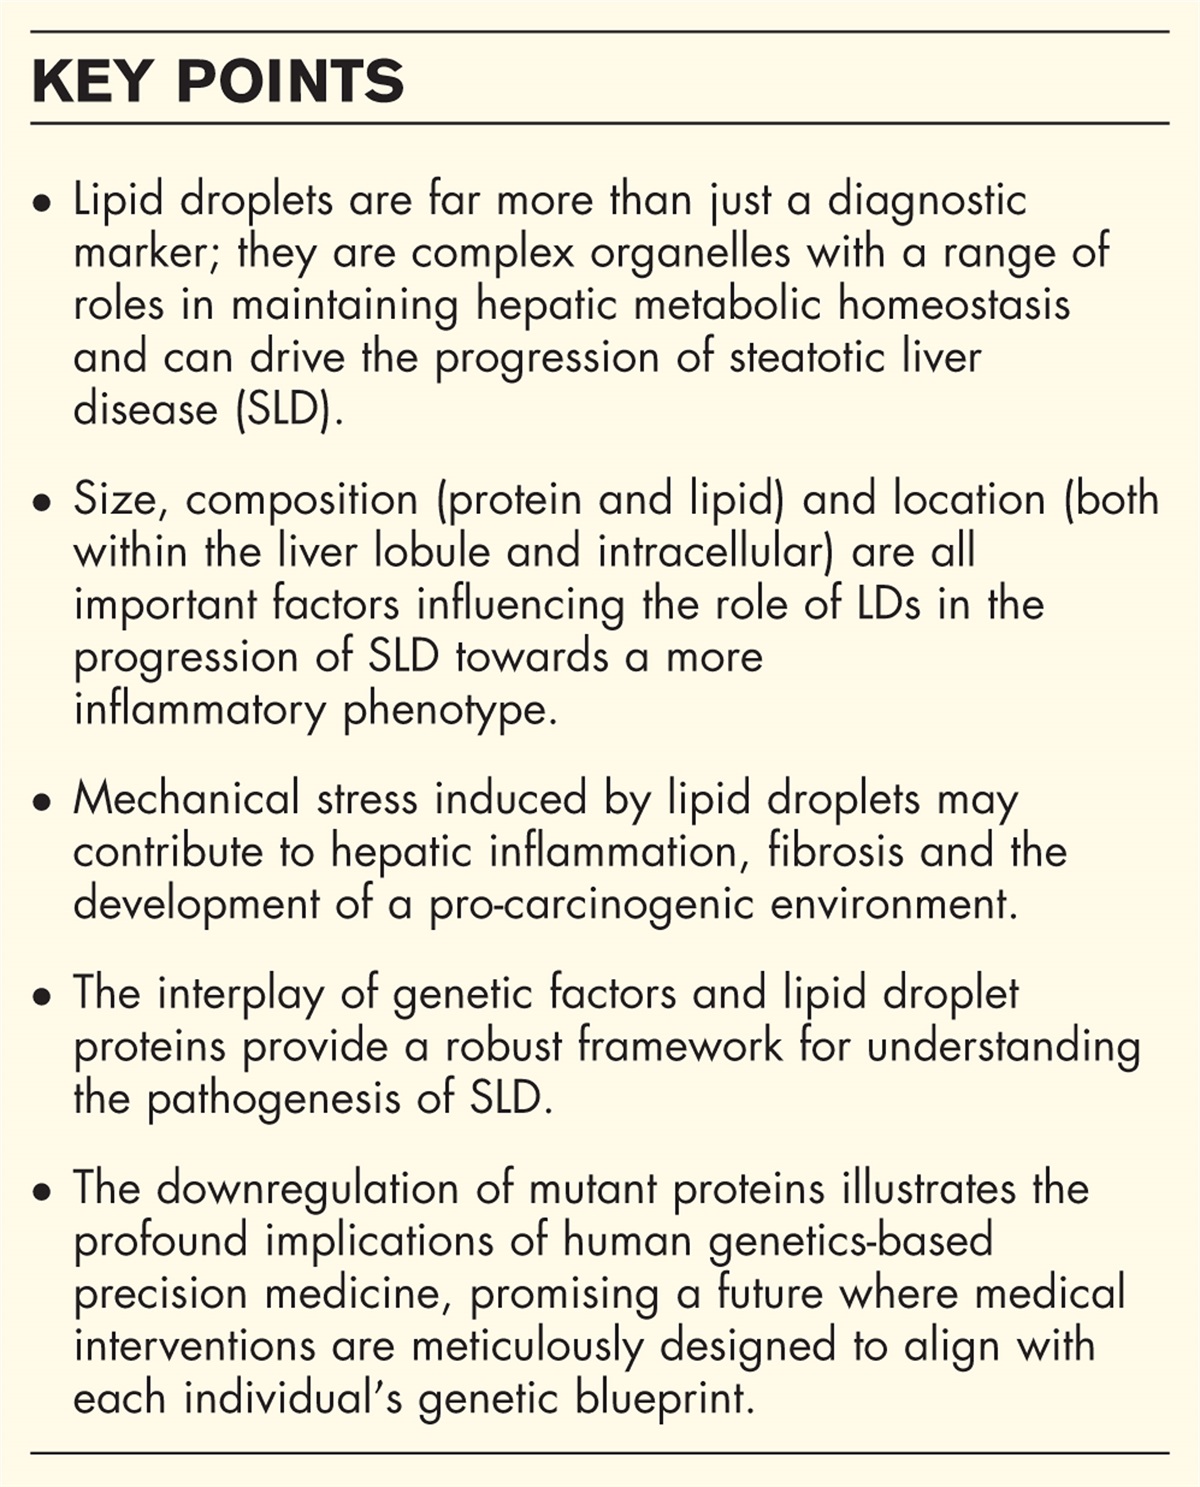 Lipid droplets in steatotic liver disease